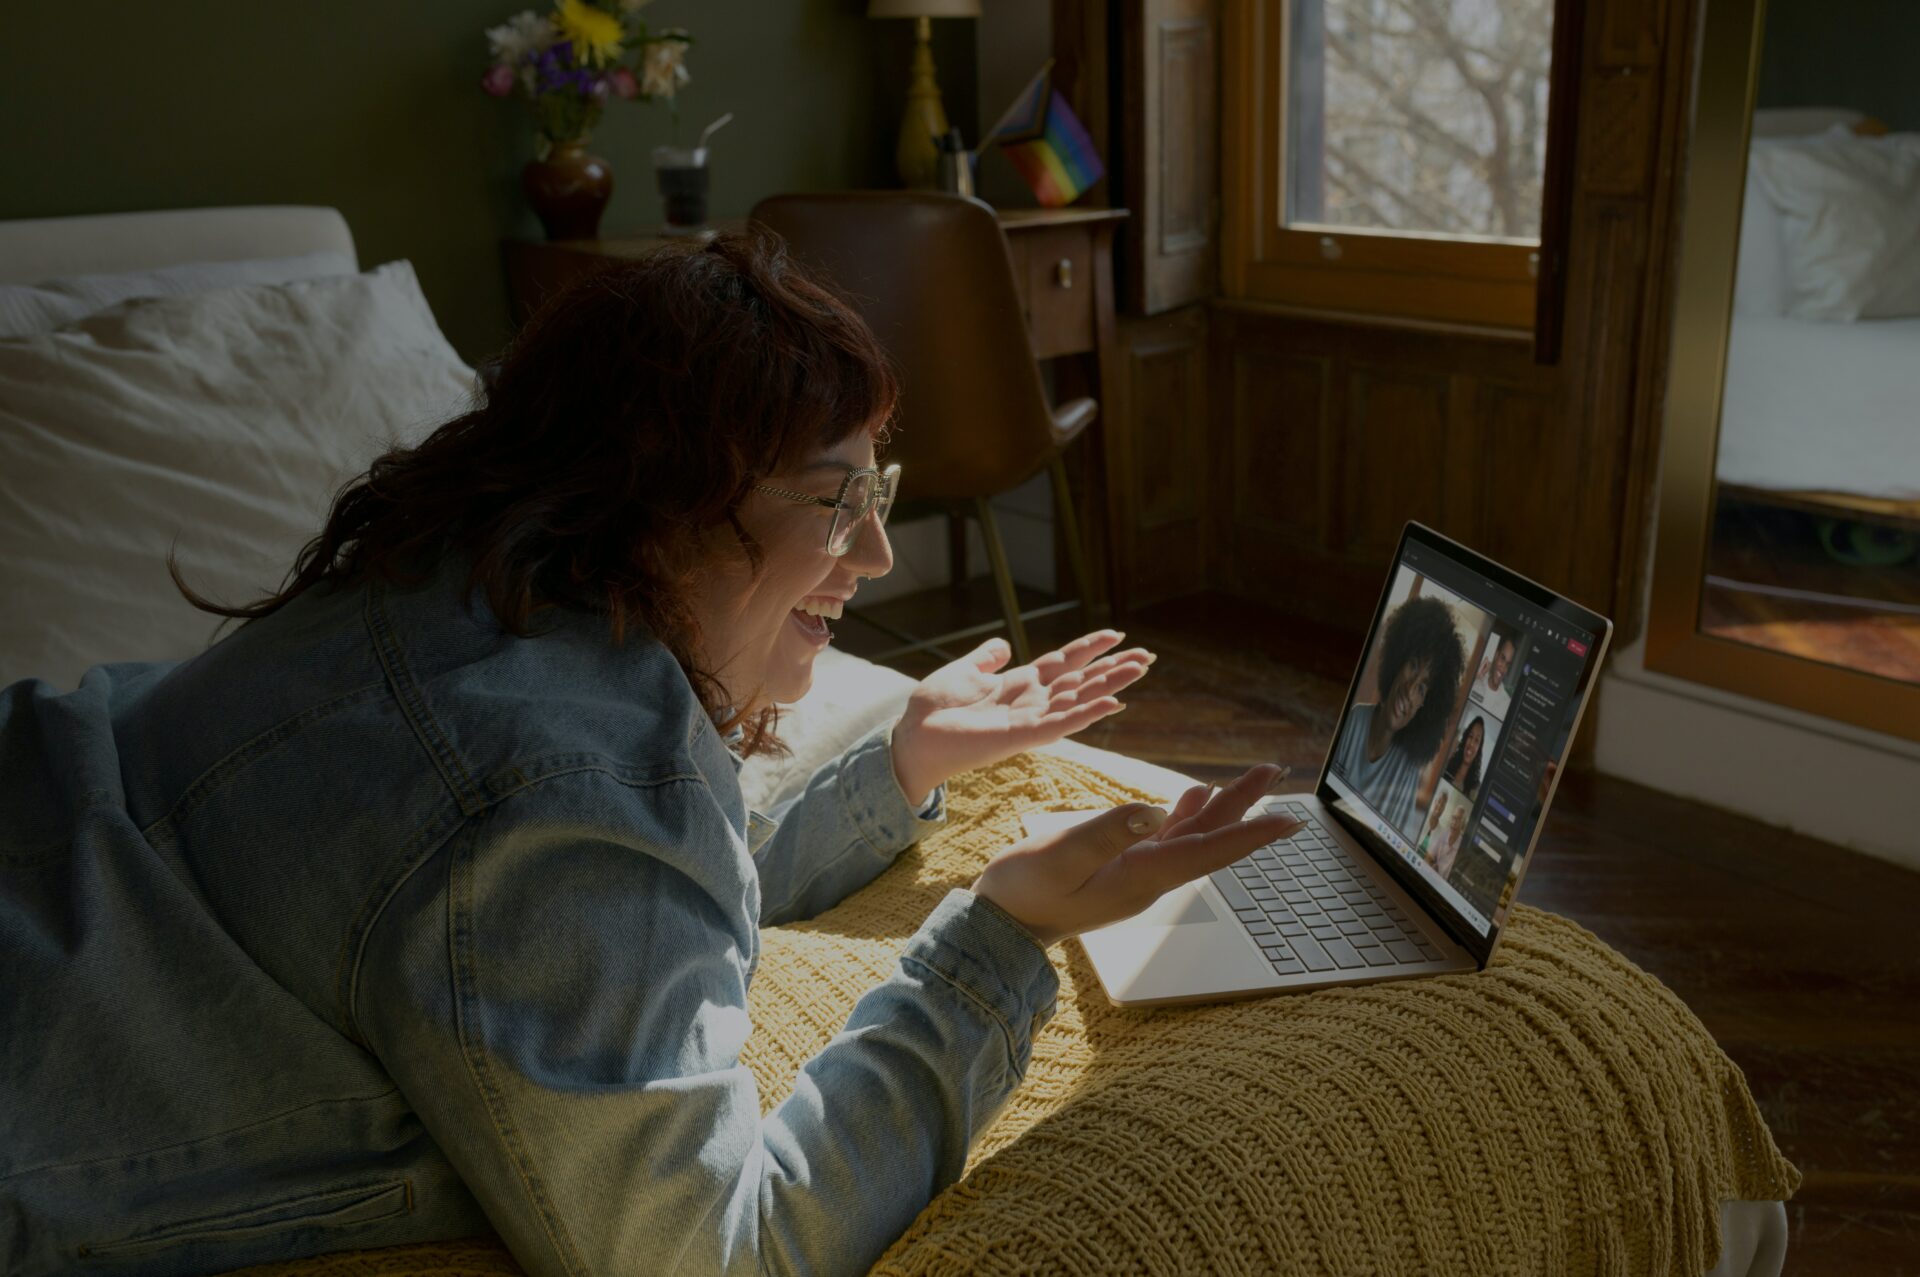 a image of a woman lying on her front on a bed, laughing and smiling at her laptop. on the laptop screen we can see a teams meeting in progress.